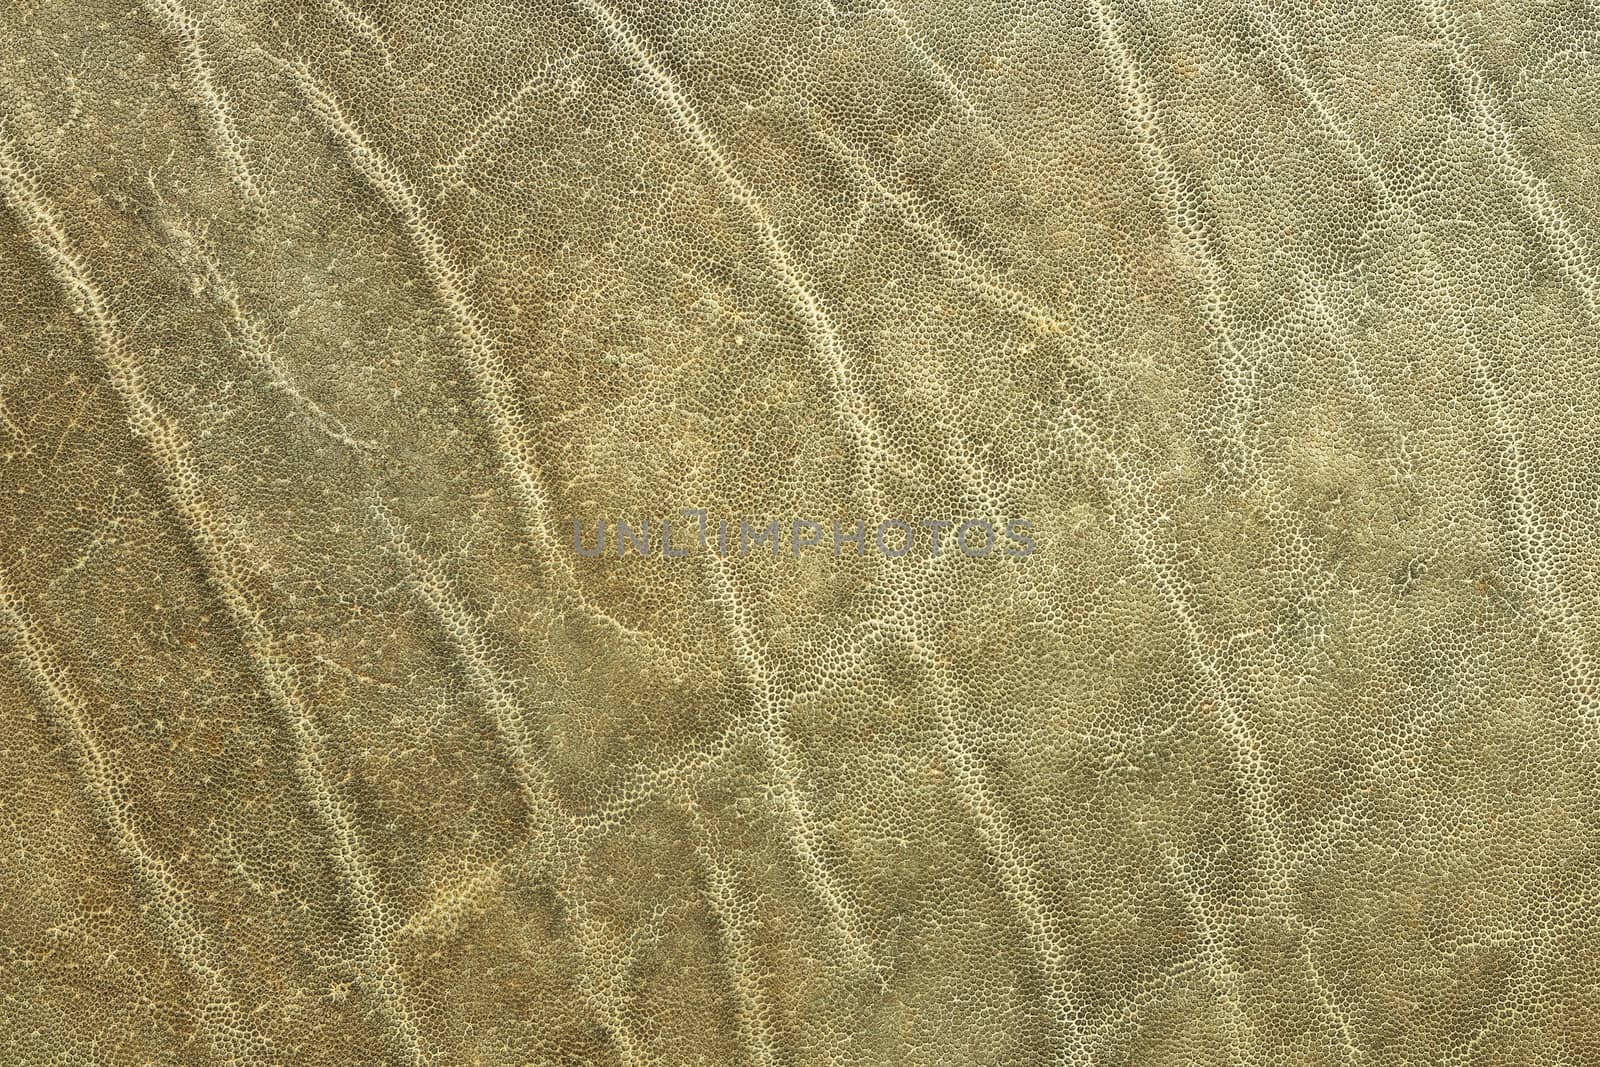 textured african elephant skin by taviphoto